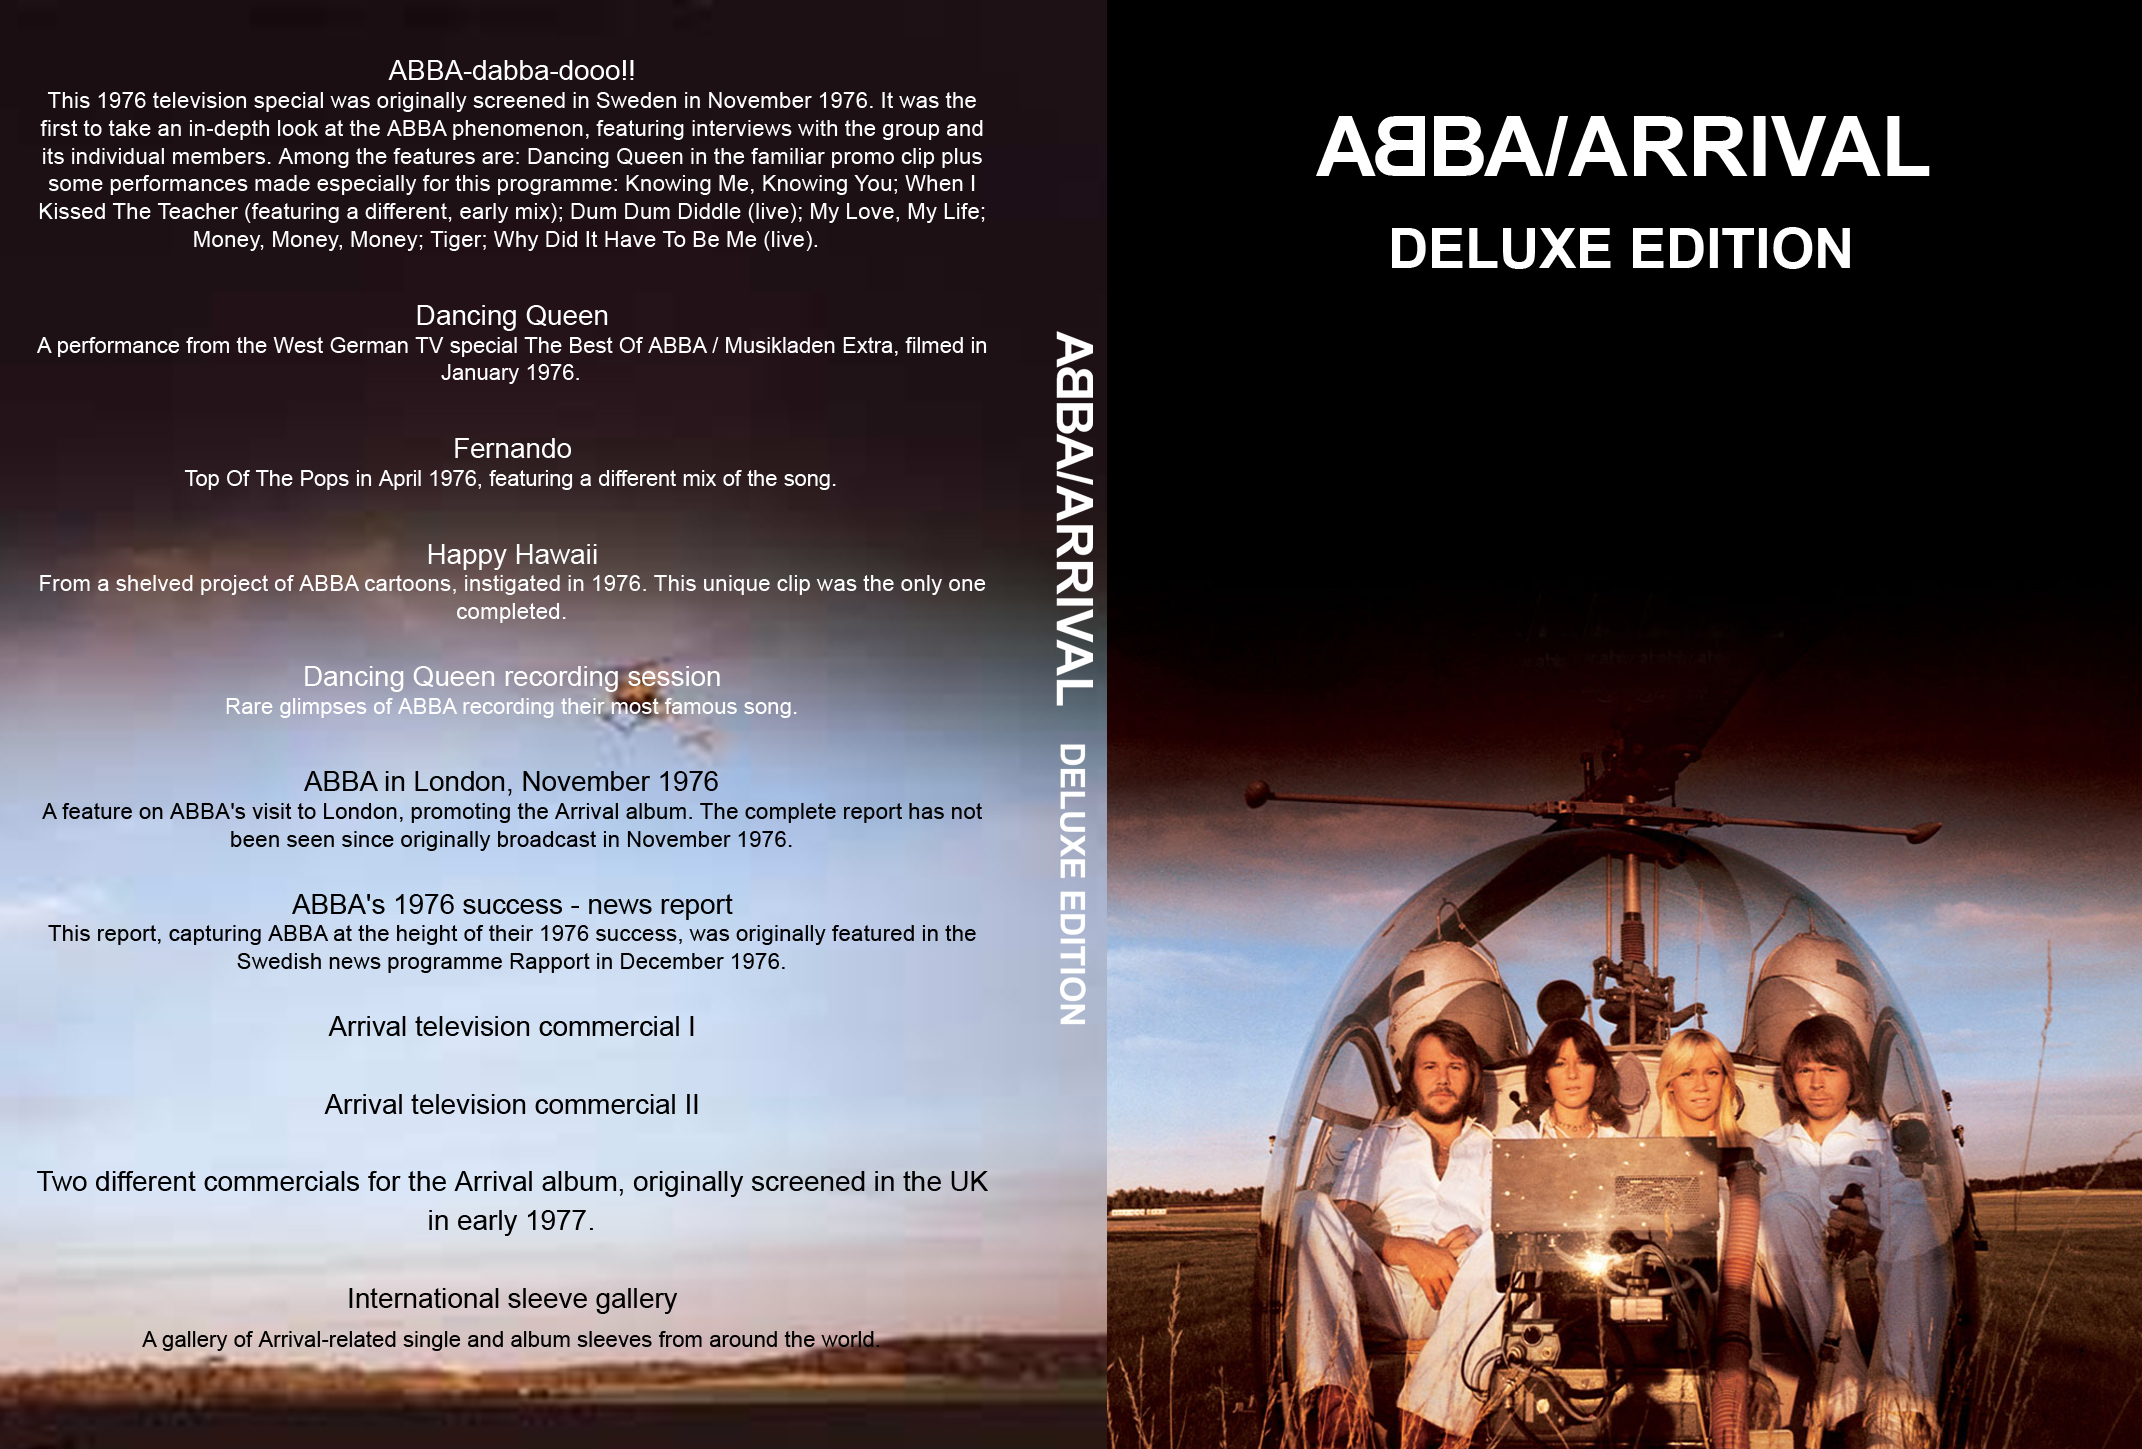 Jaquette DVD ABBA - Arrival Deluxe Edition